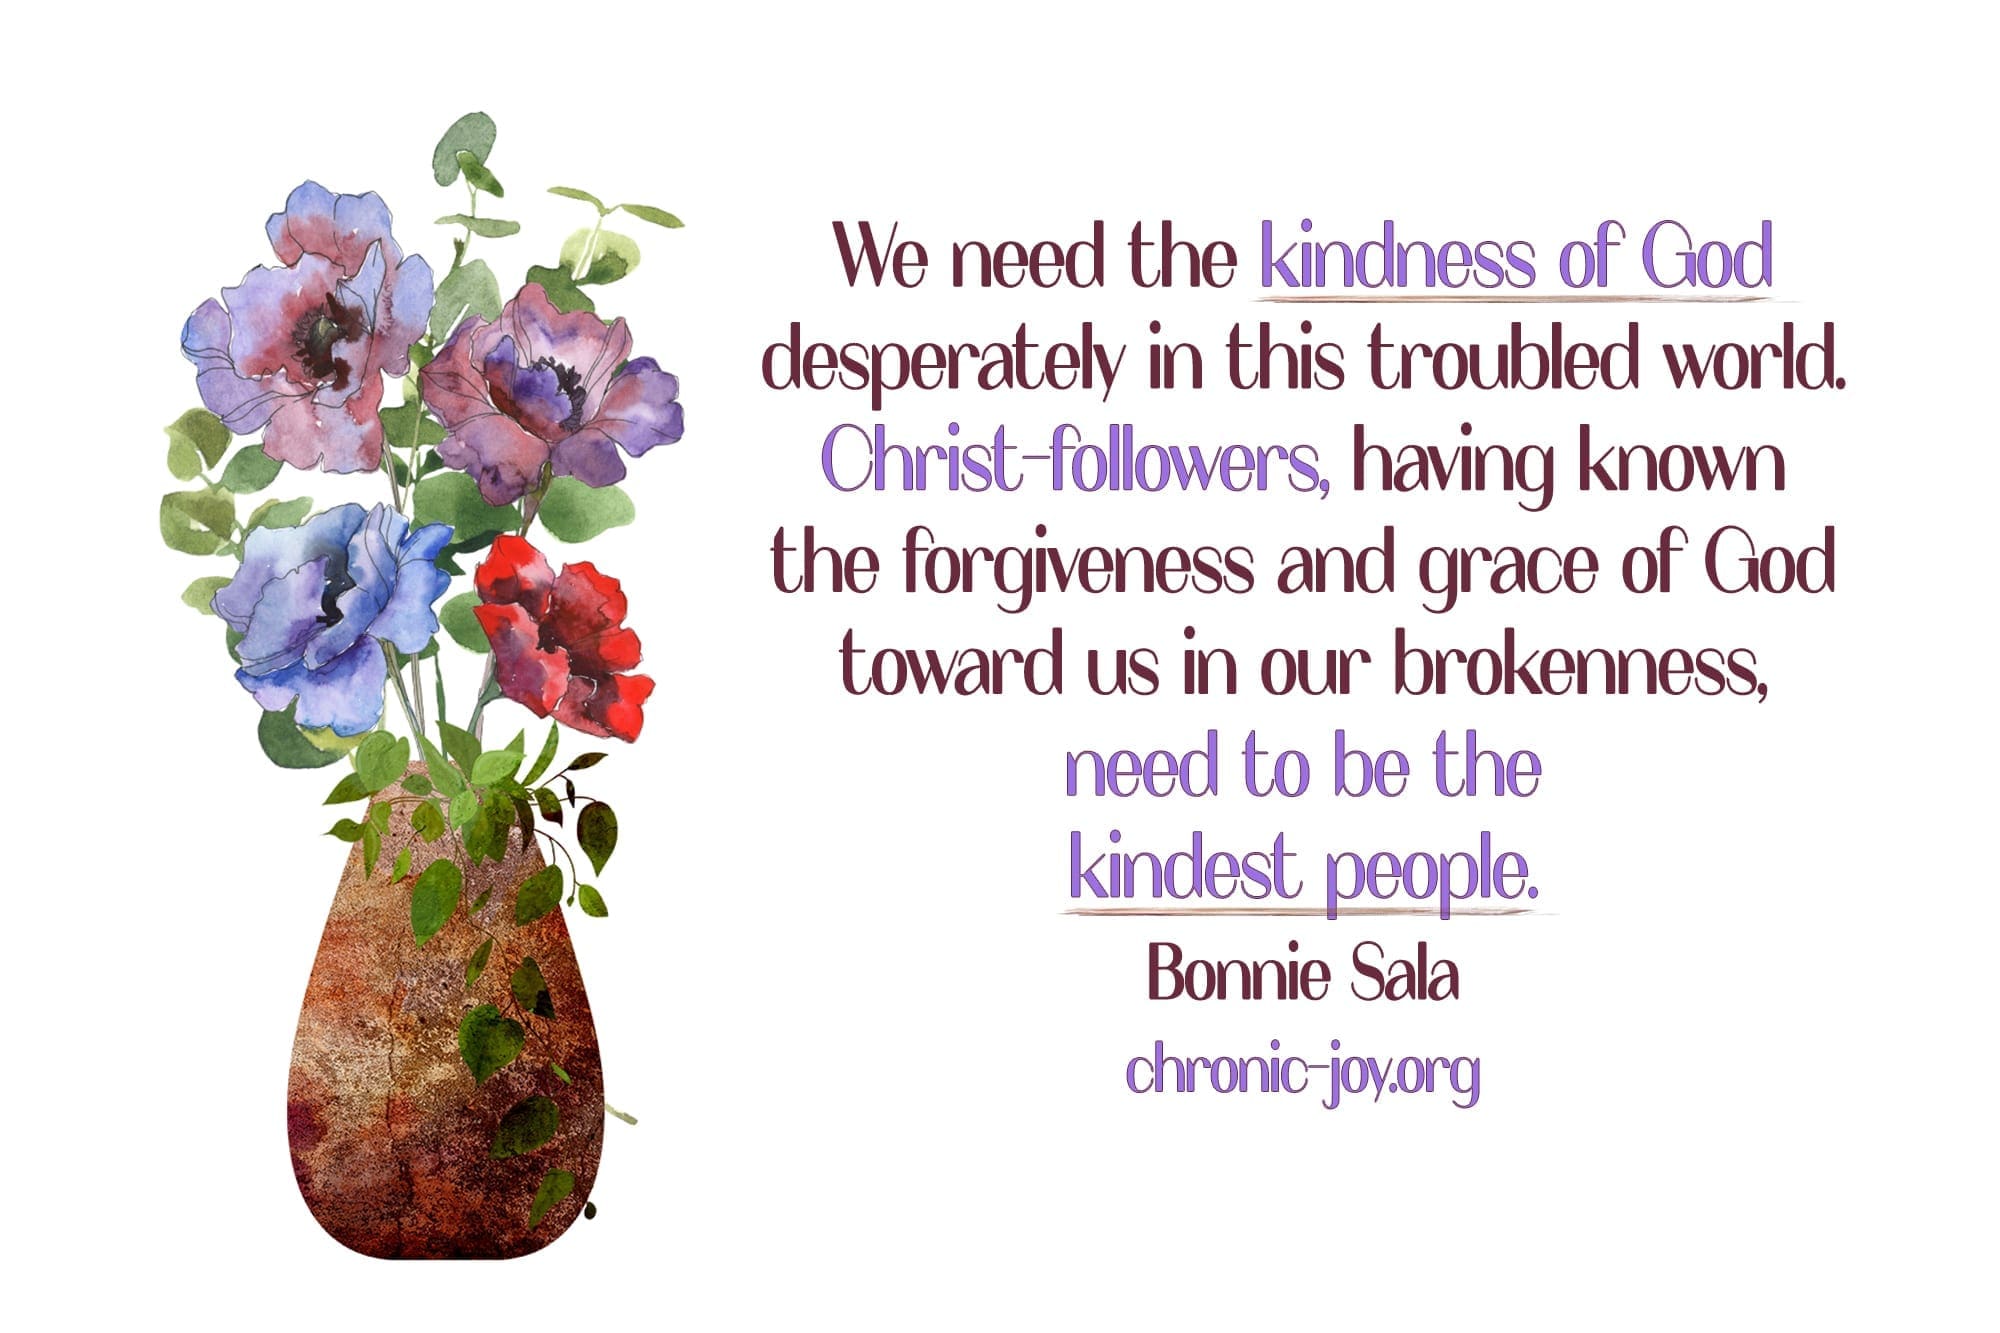 "We need the kindness of God desperately in this troubled world. Christ-followers, having known the forgiveness and grace of God toward us in our brokenness, need to be the kindest people." Bonnie Sala